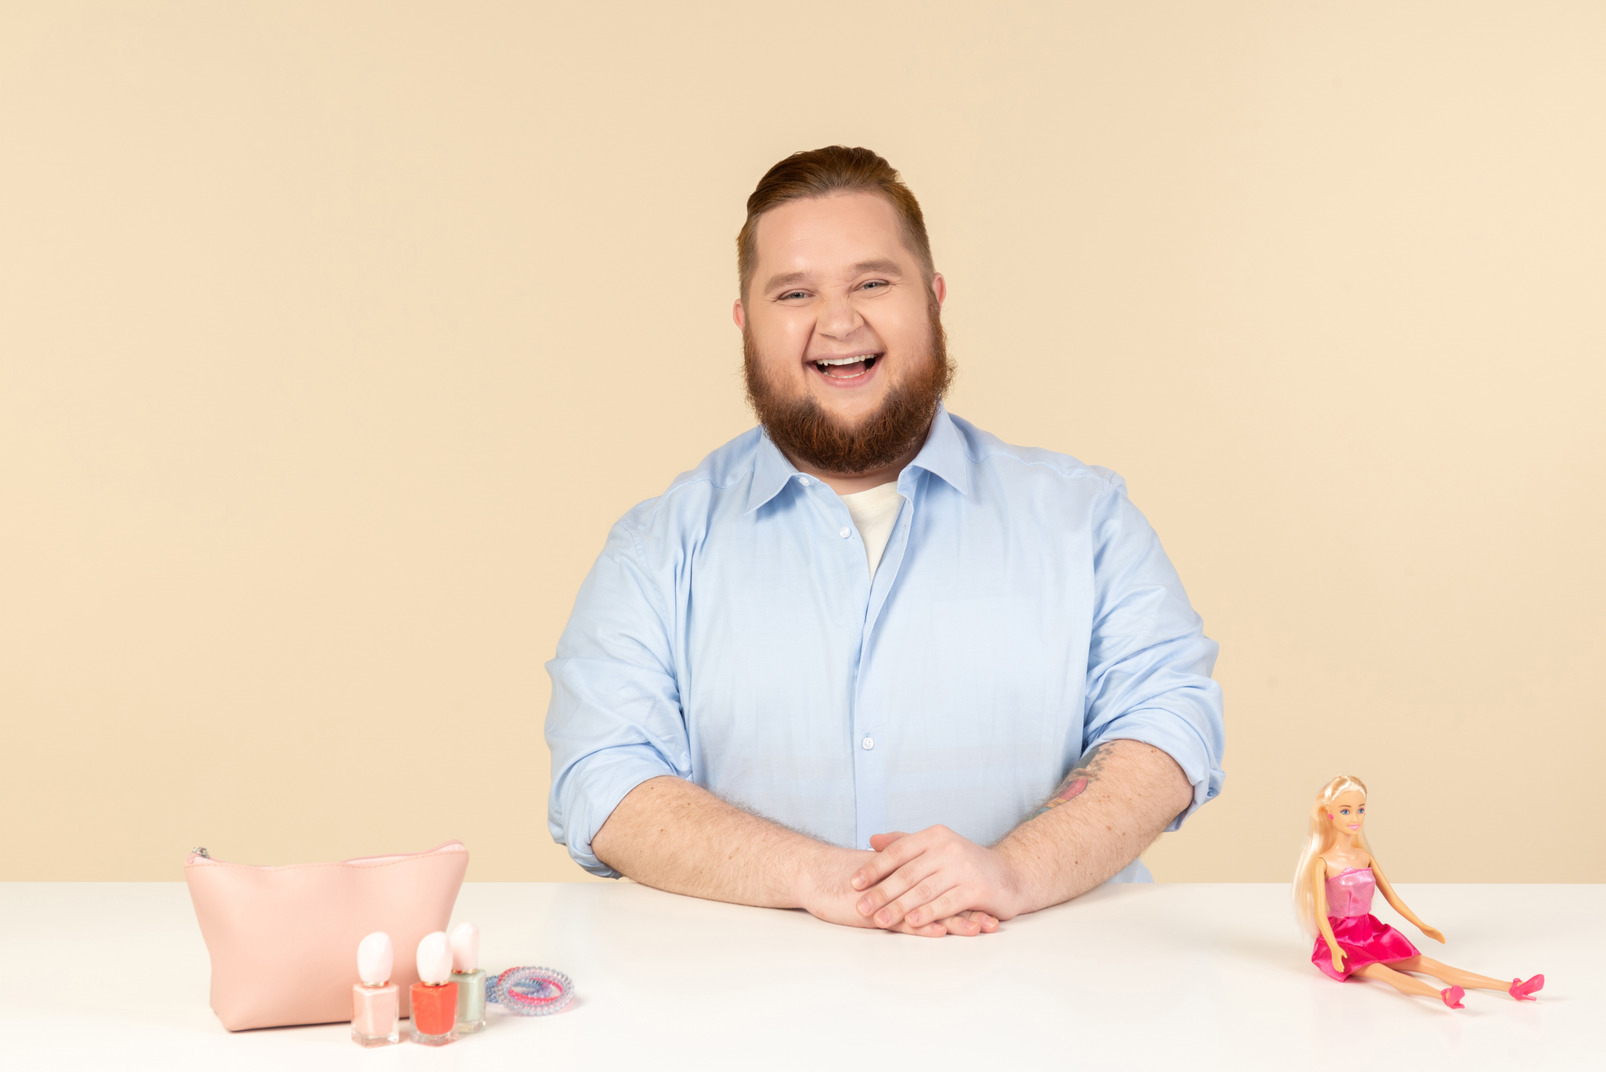 Laughing big man sitting at the table with cosmetics and barbie doll on it